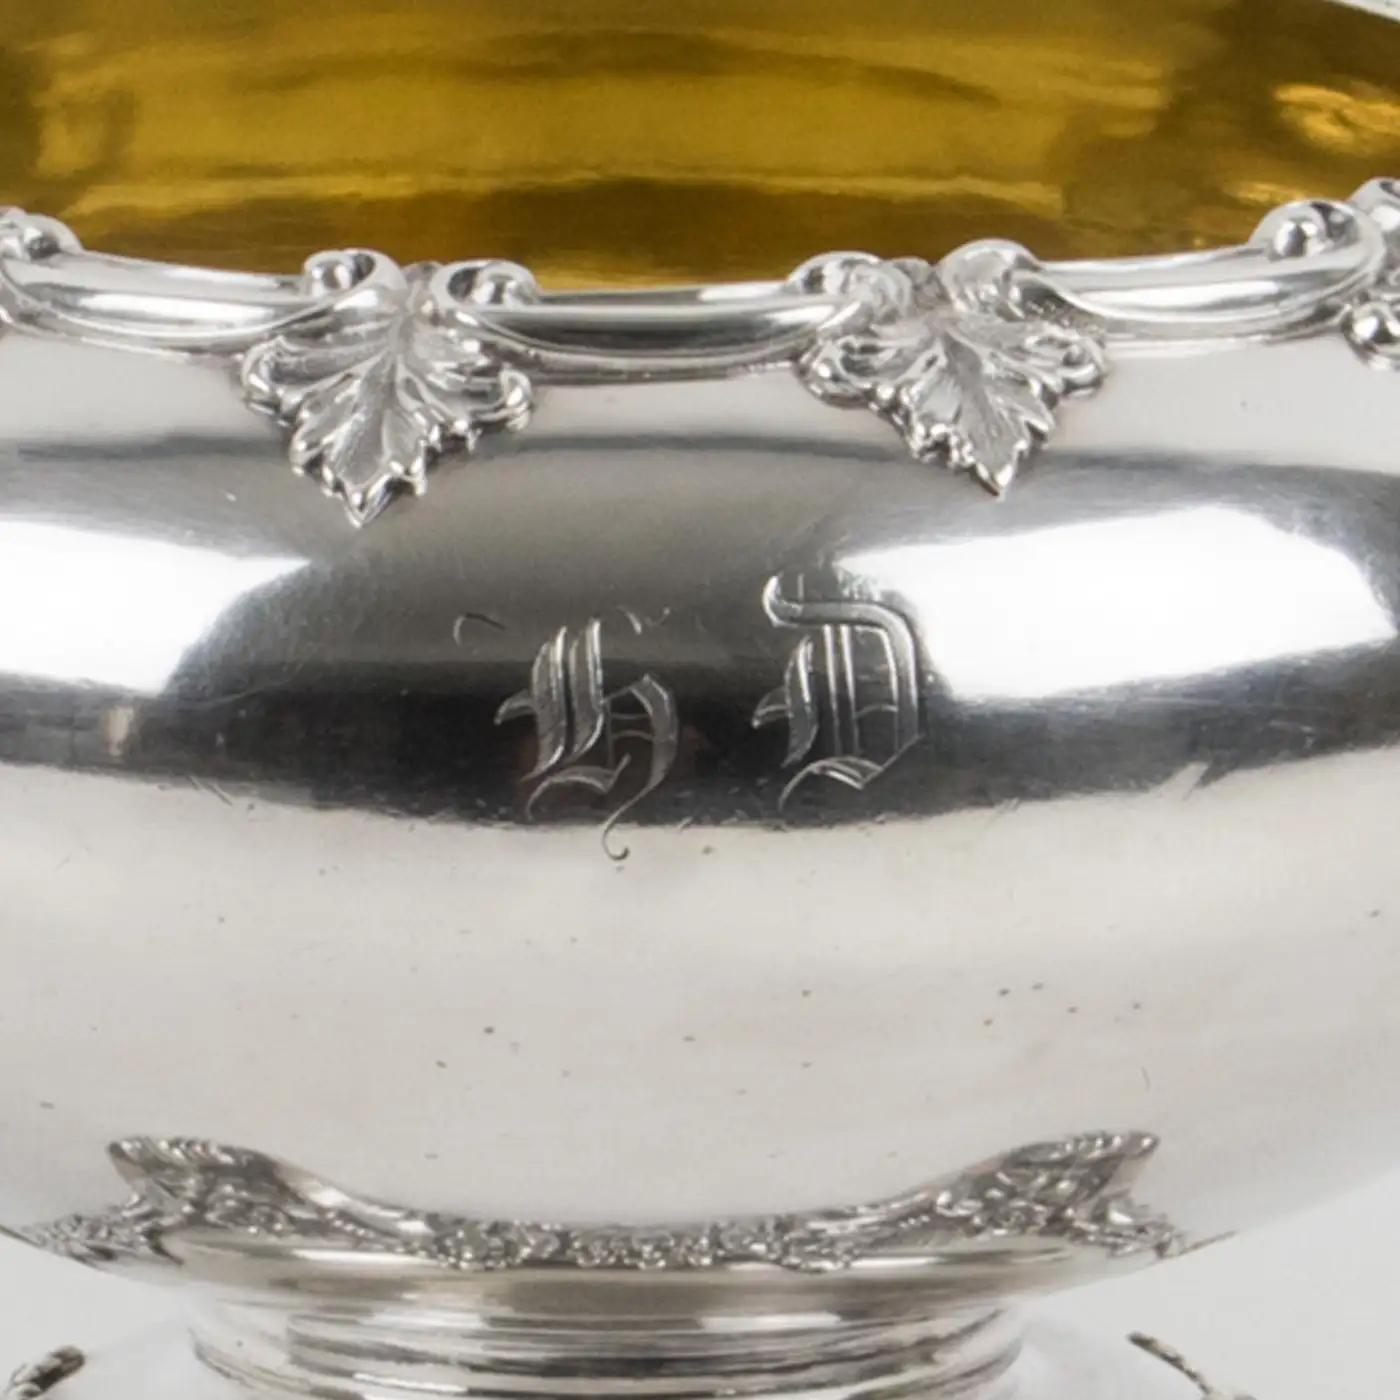 Gustave Odiot Paris 19th Century Sterling Silver Decorative Bowl For Sale 5